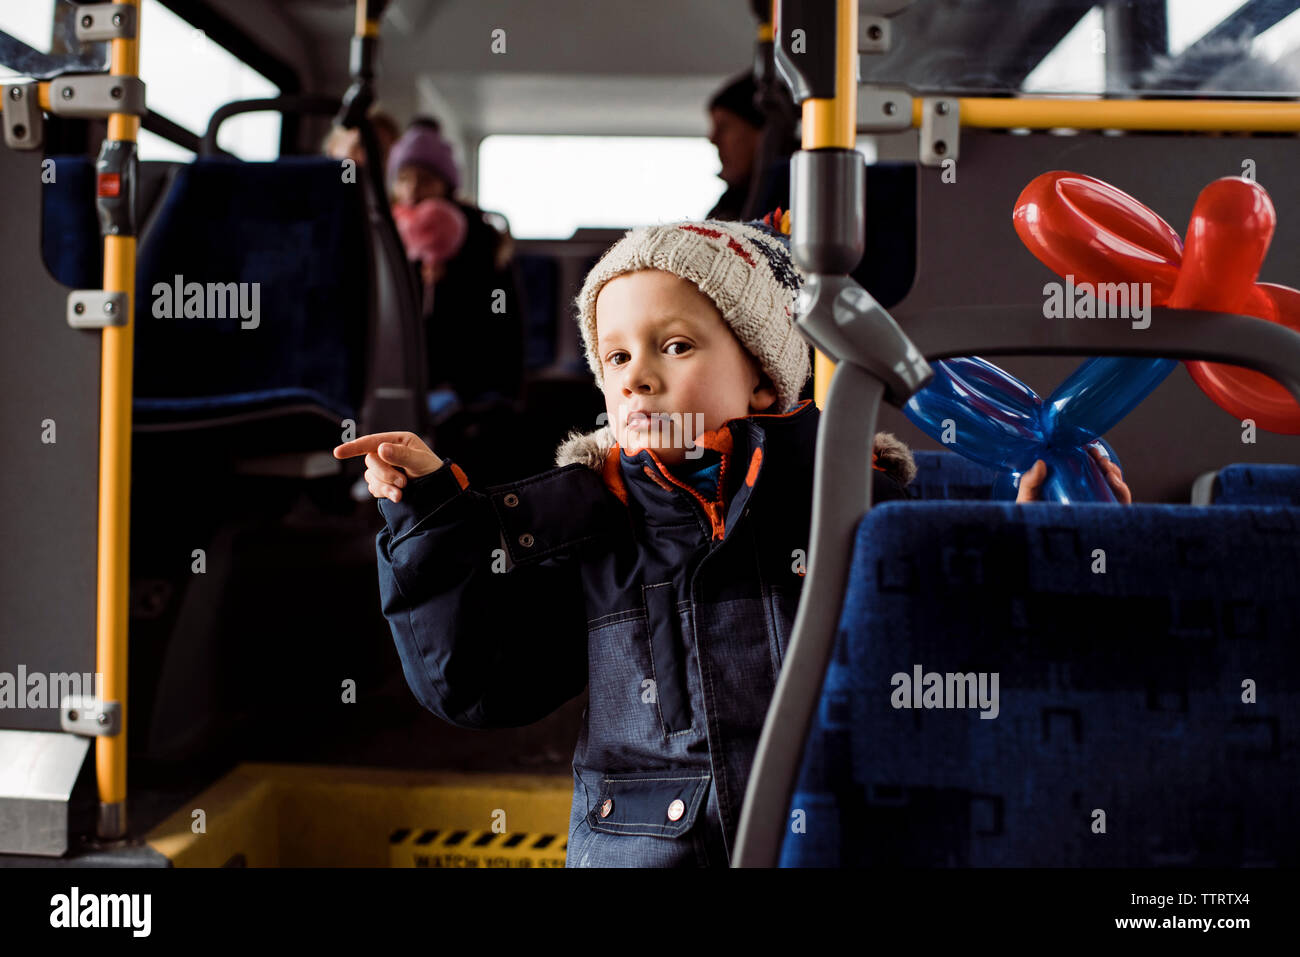 Cute boy with balloons wearing warm clothing while pointing in bus Stock Photo